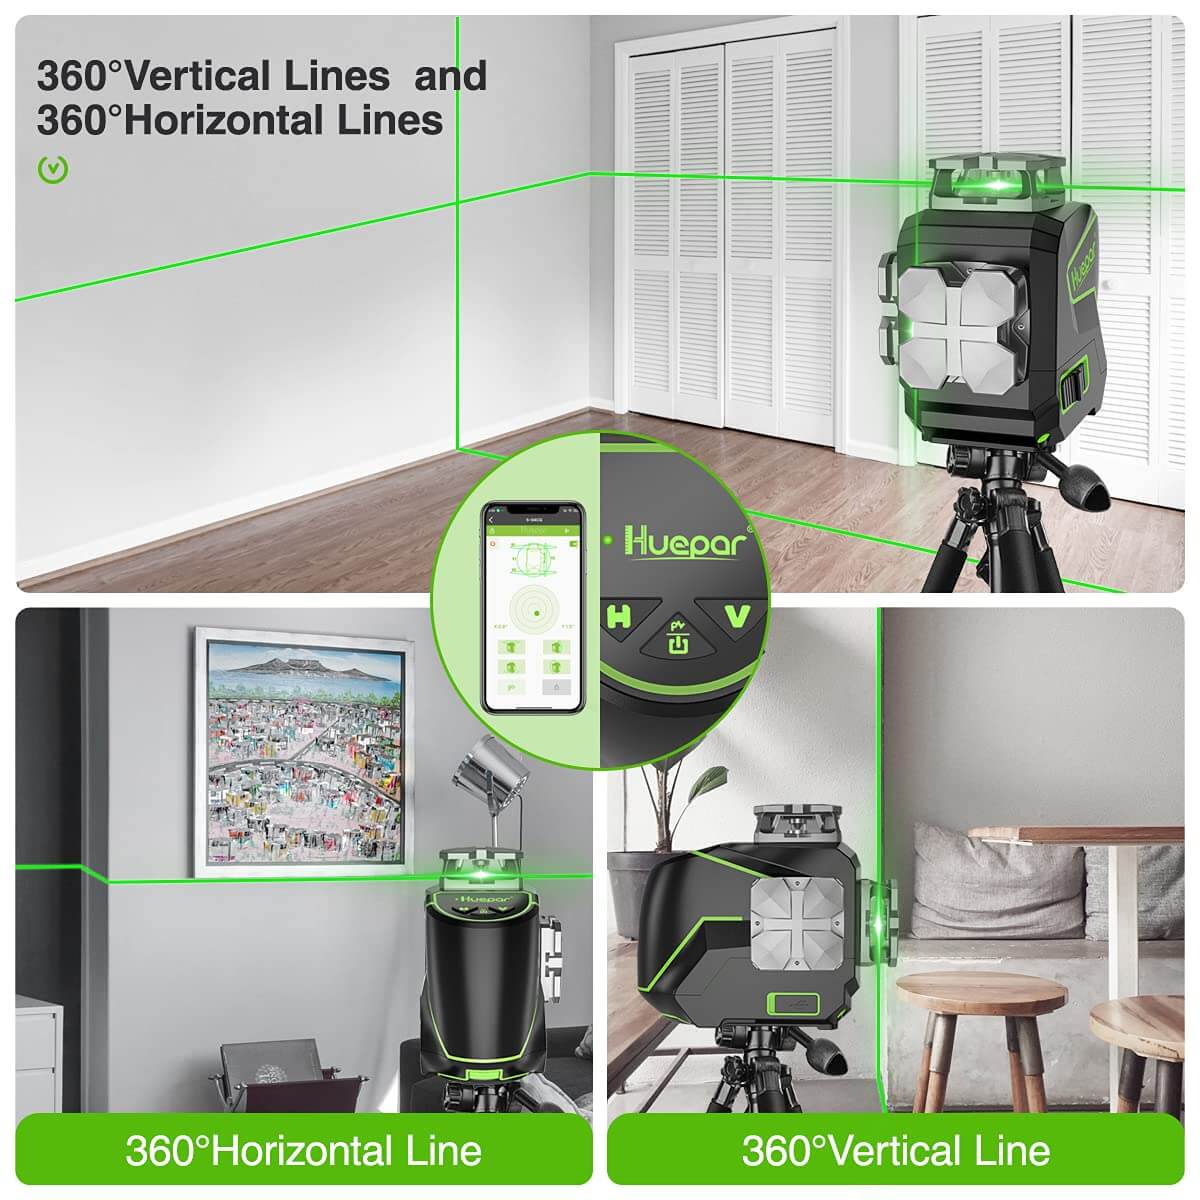 Huepar S02CG 2x360 self-leveling cross line laser with Bluetooth connectivity and metal laser window1